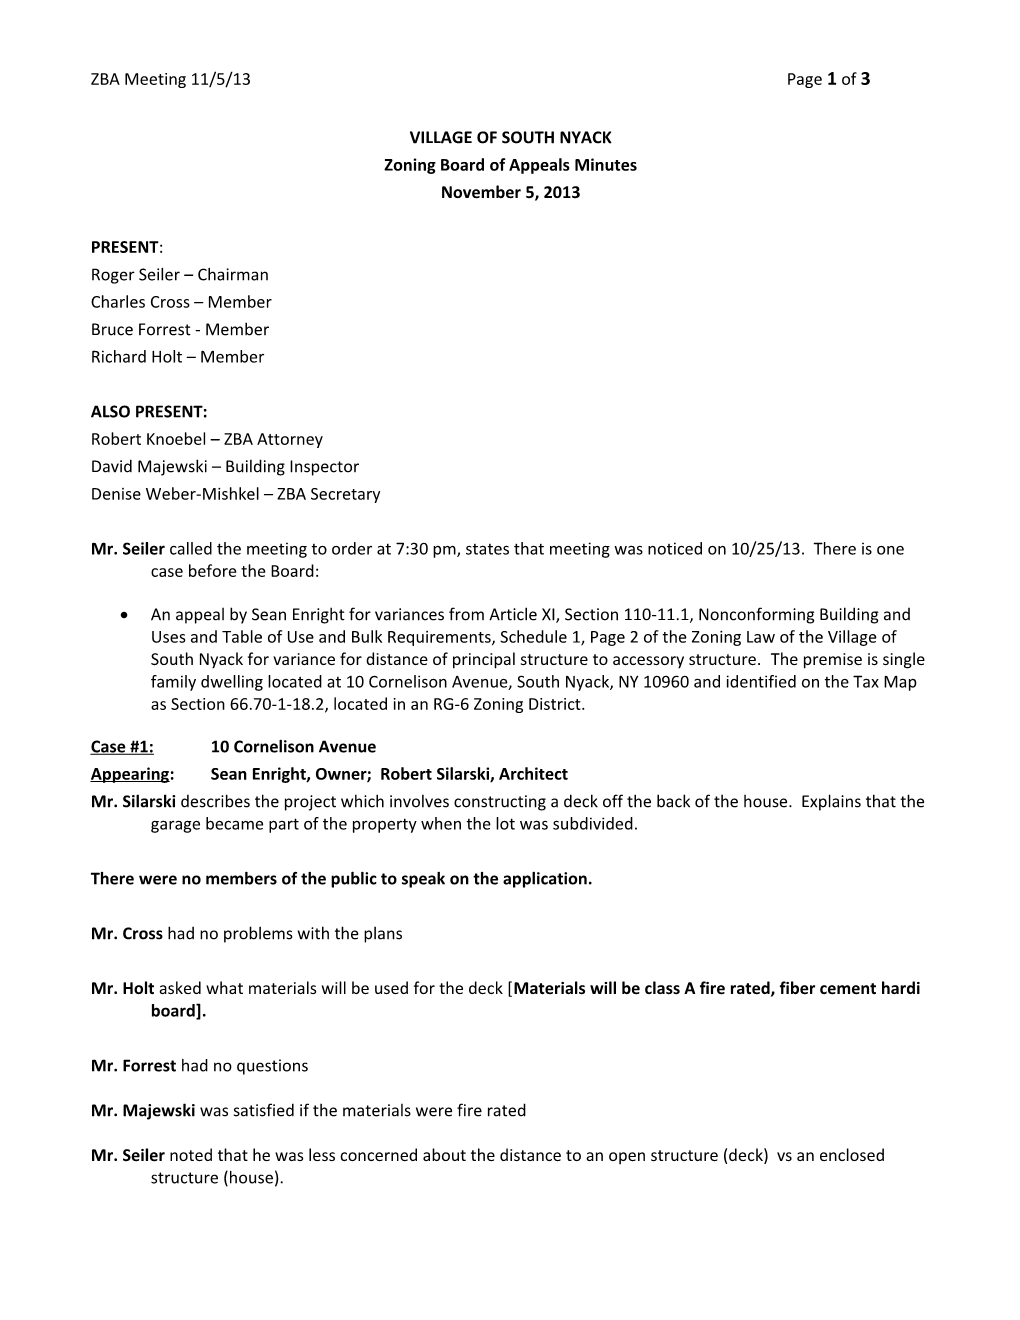 Zoning Board of Appeals Minutes